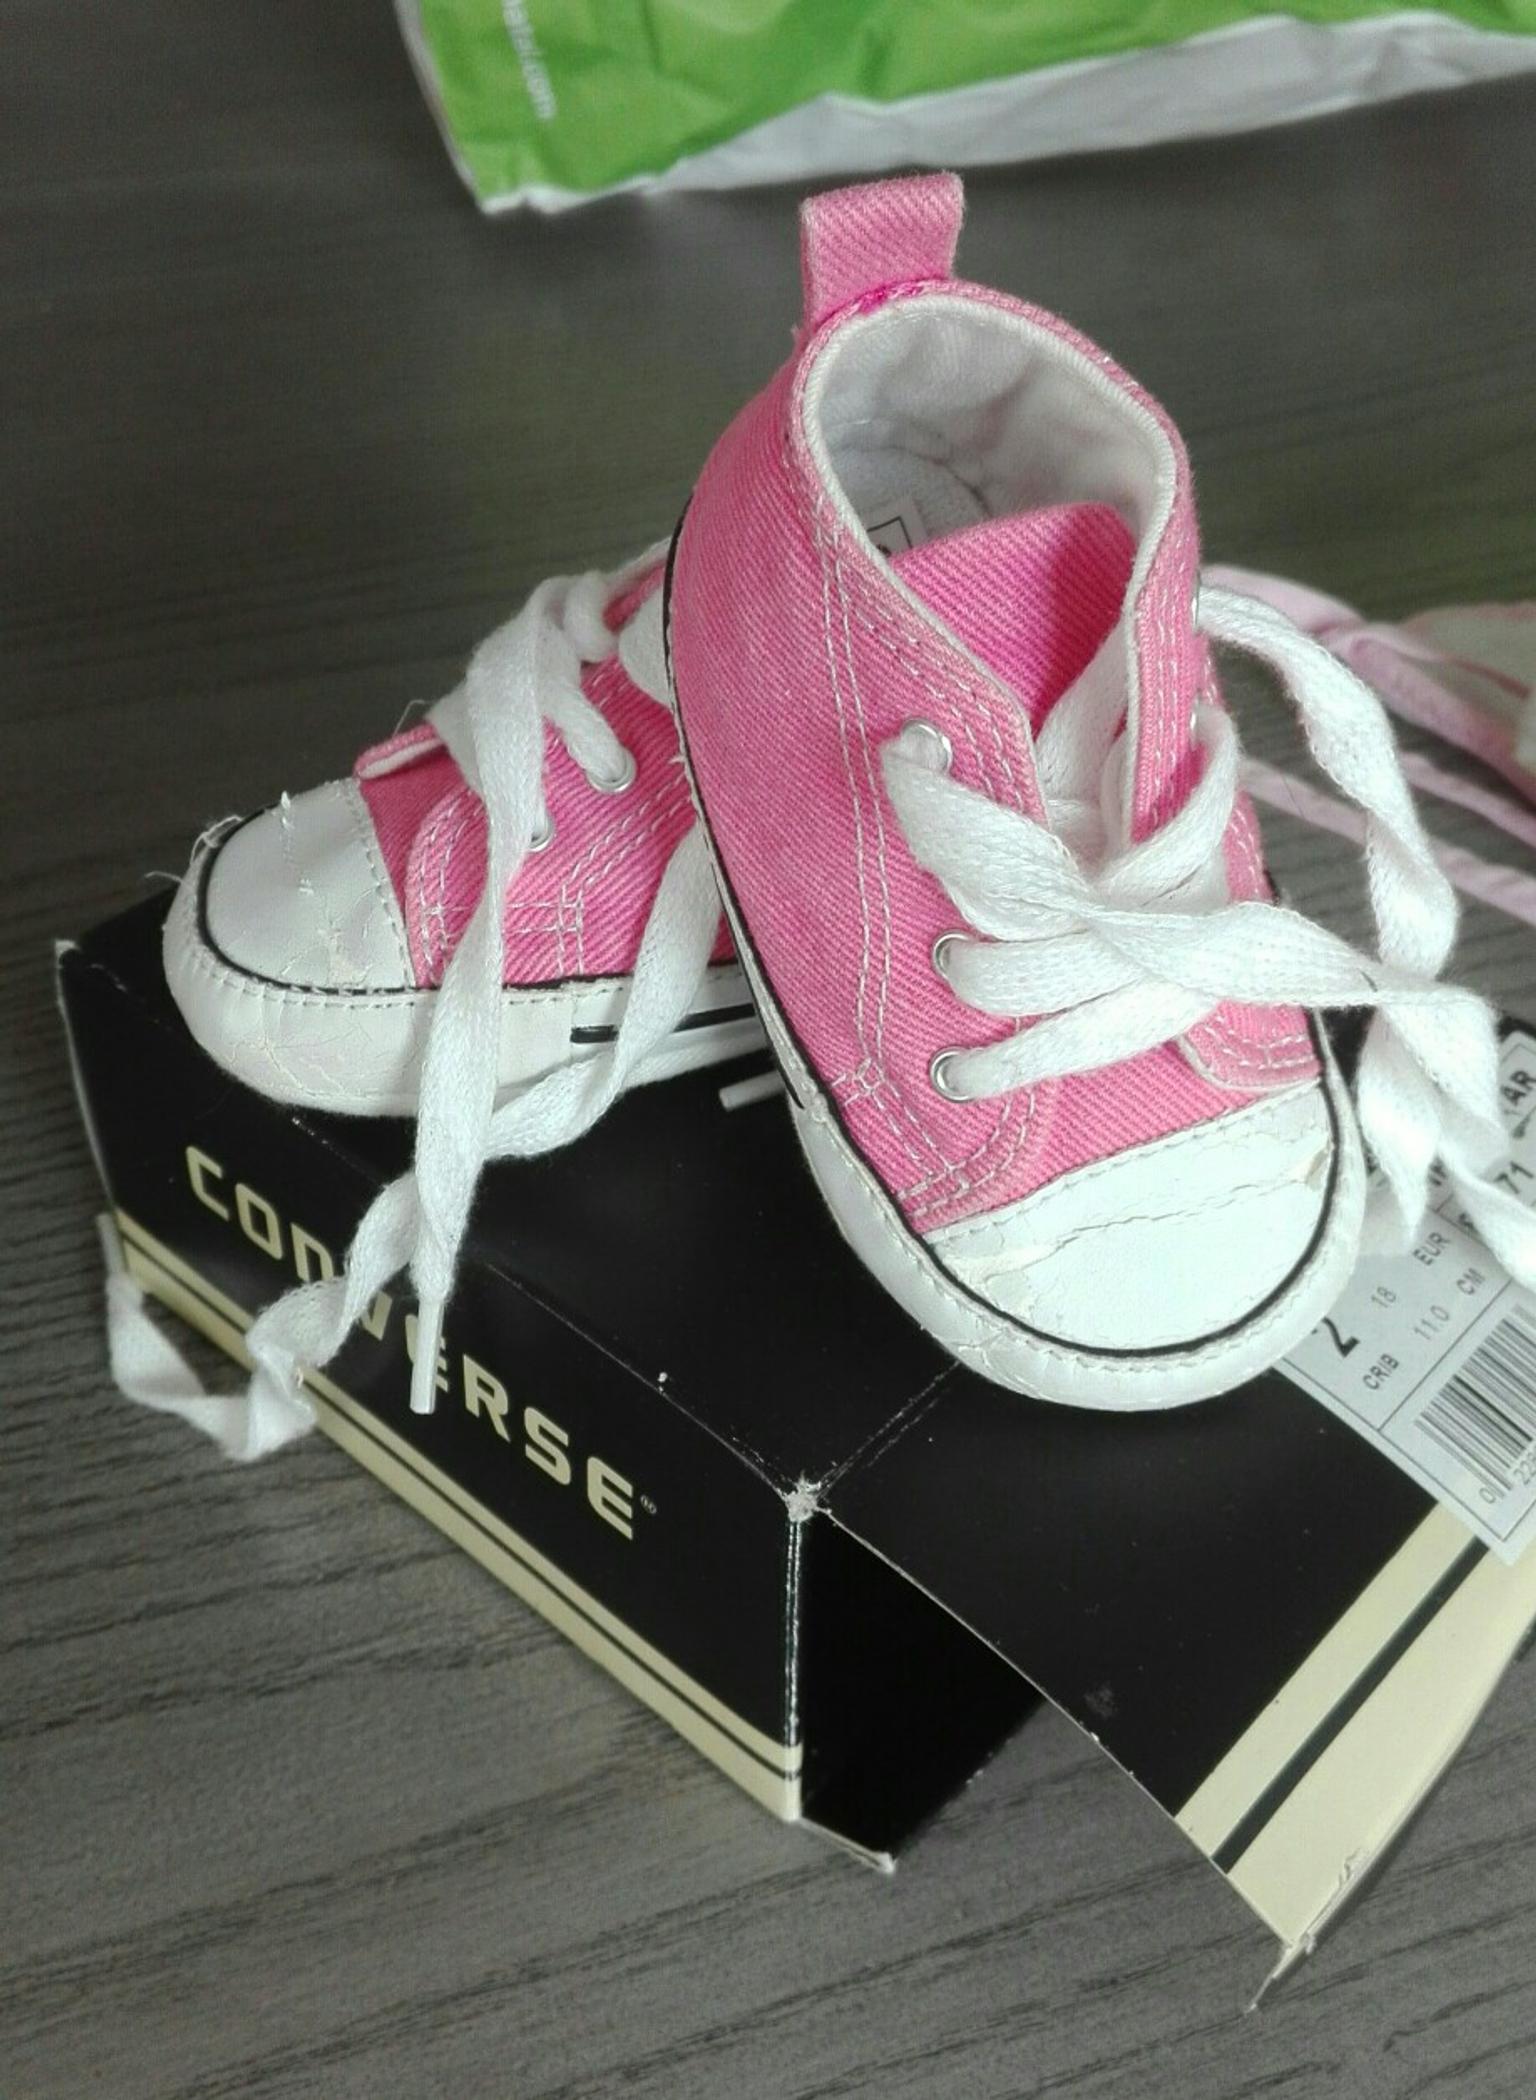 converse numero 18 pink in 72100 Brindisi for €3.00 for sale | Shpock